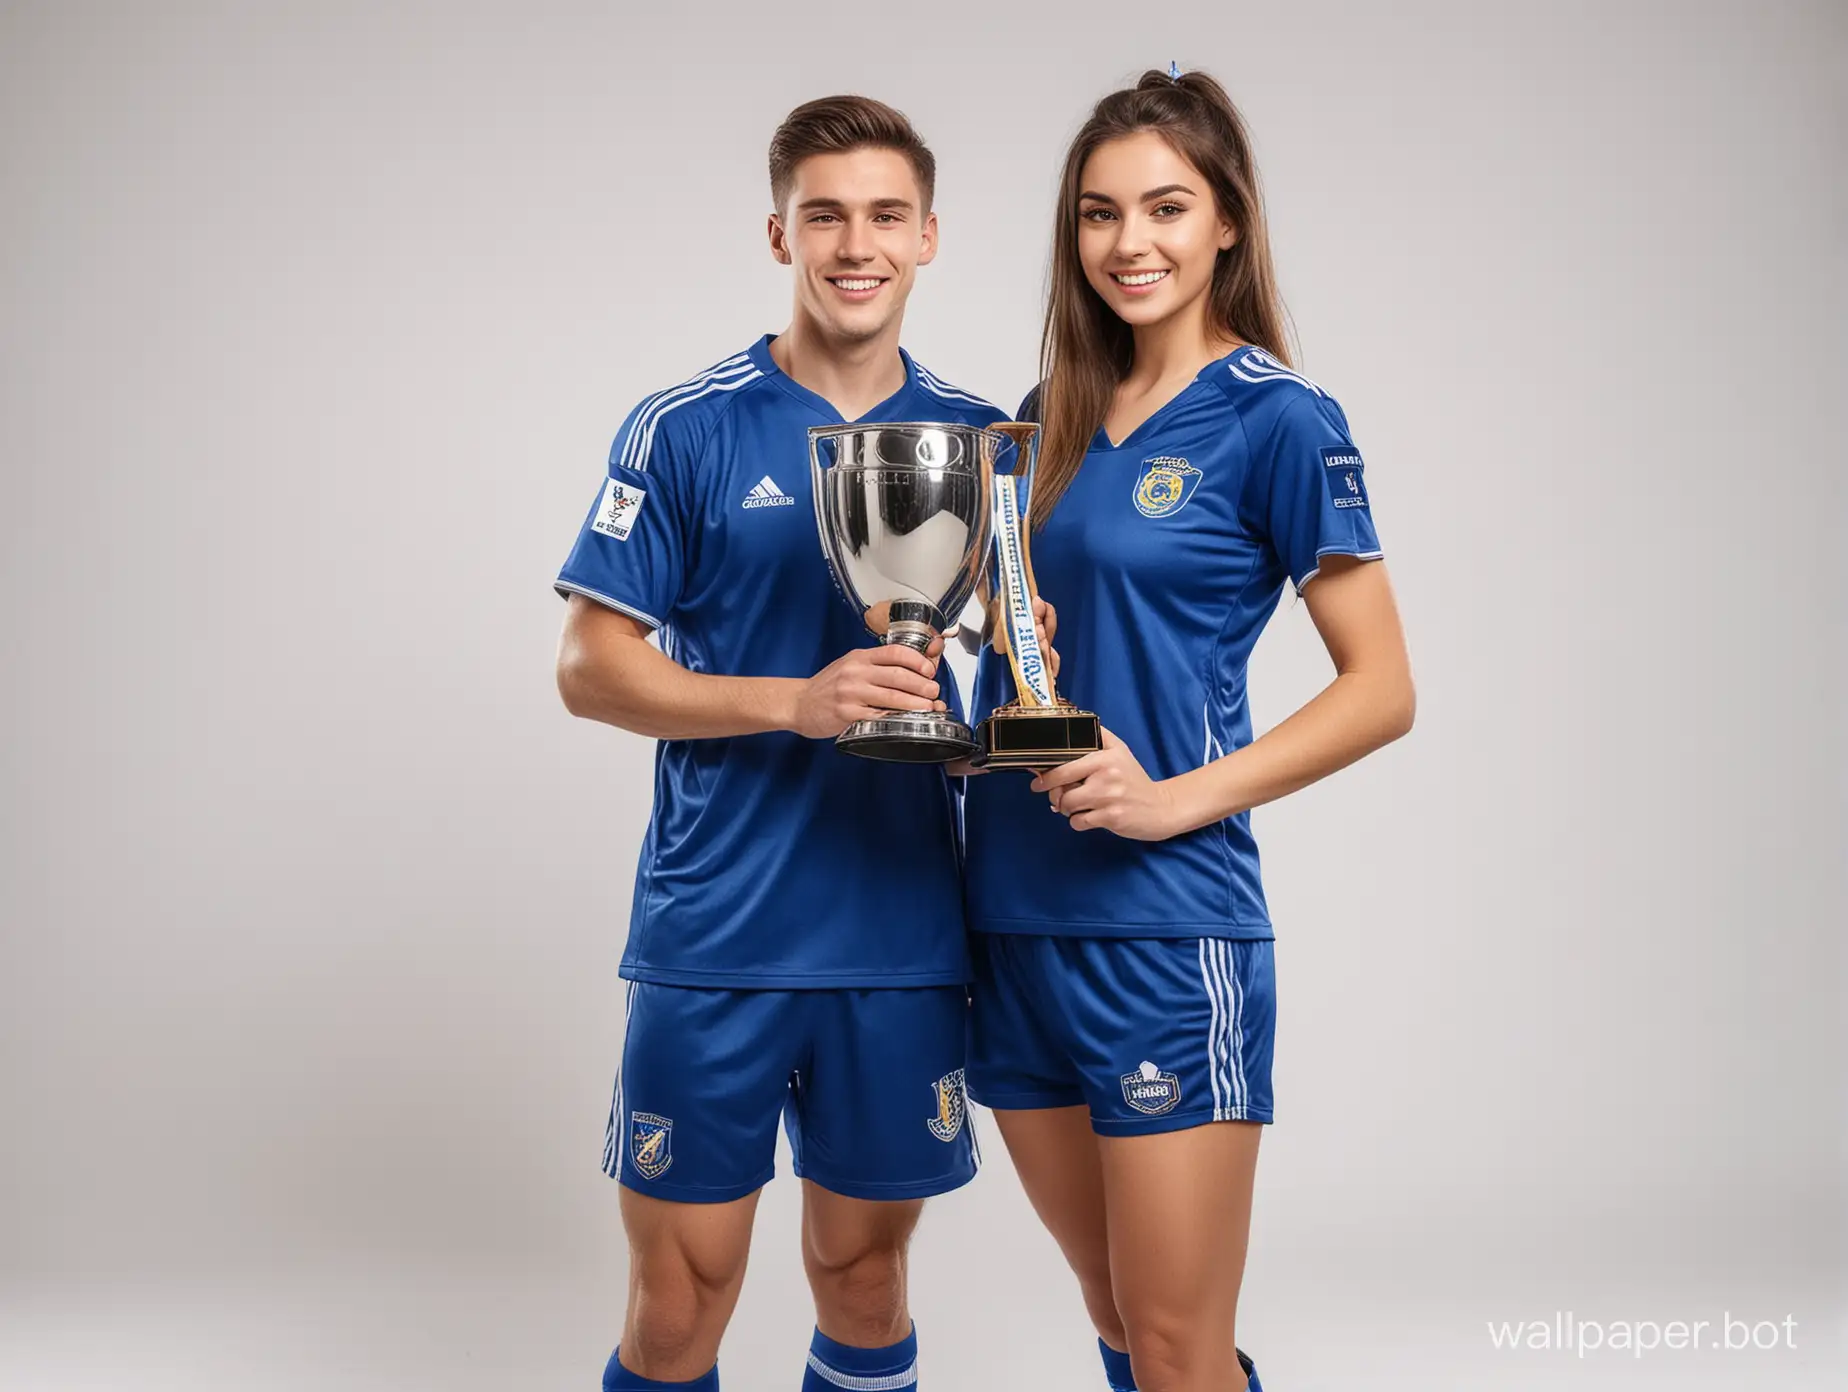 Soccer guy 23 years old in a fashionable blue uniform and girl 26 years old in a blue uniform holding a huge winners' cup white background